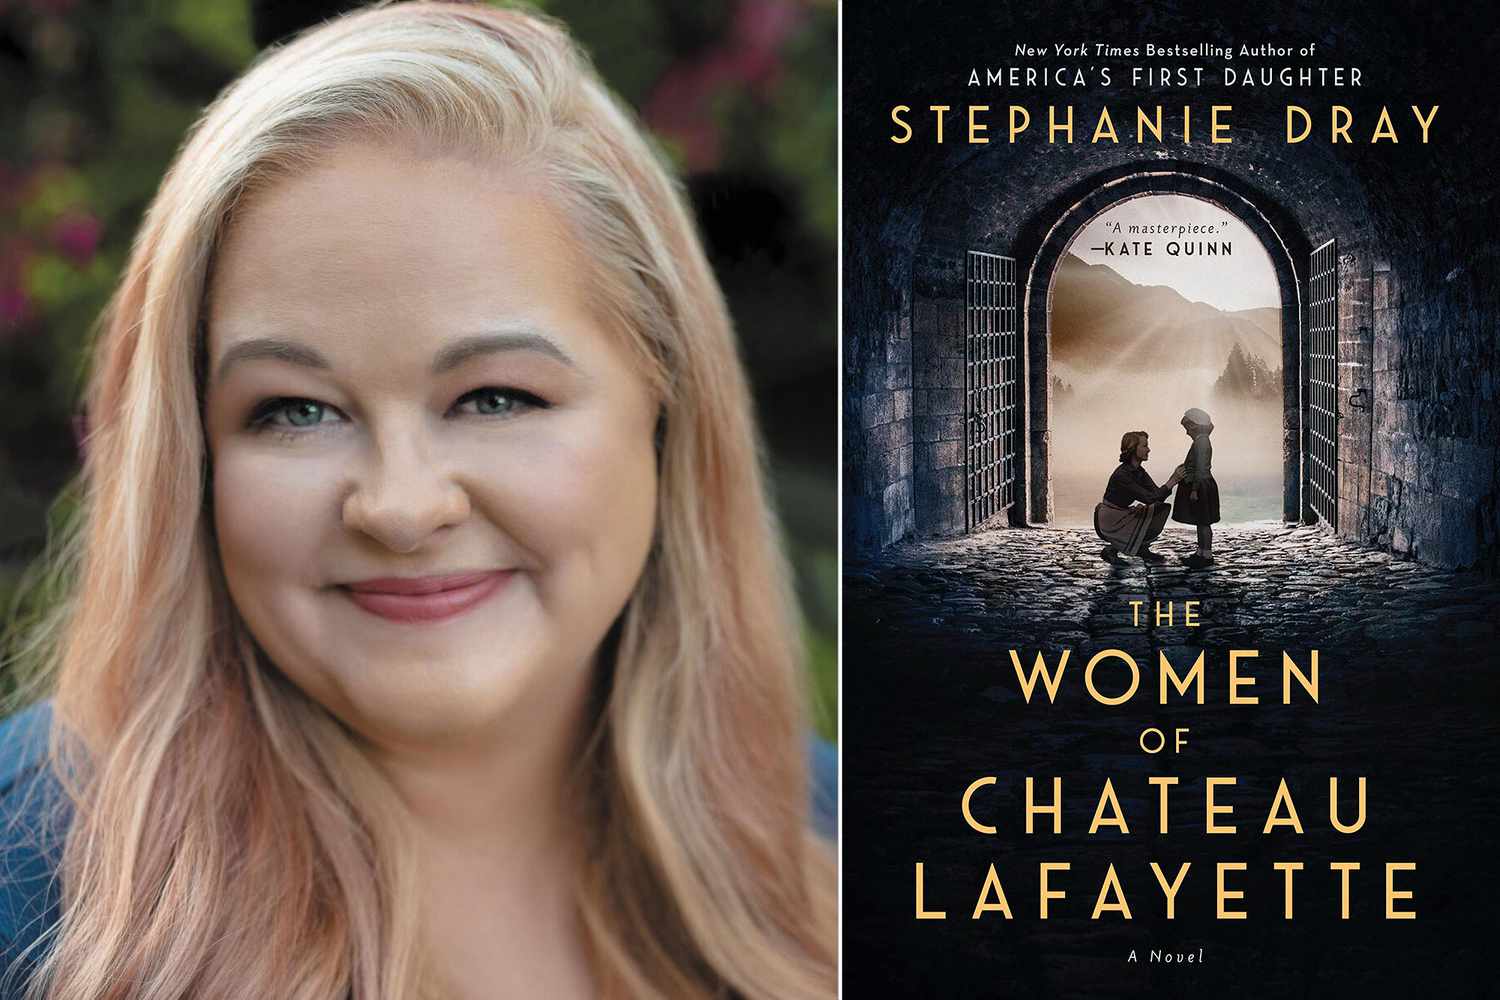 Kate Quinn recommends The Women of Chateau Lafayette by Stephanie Dray